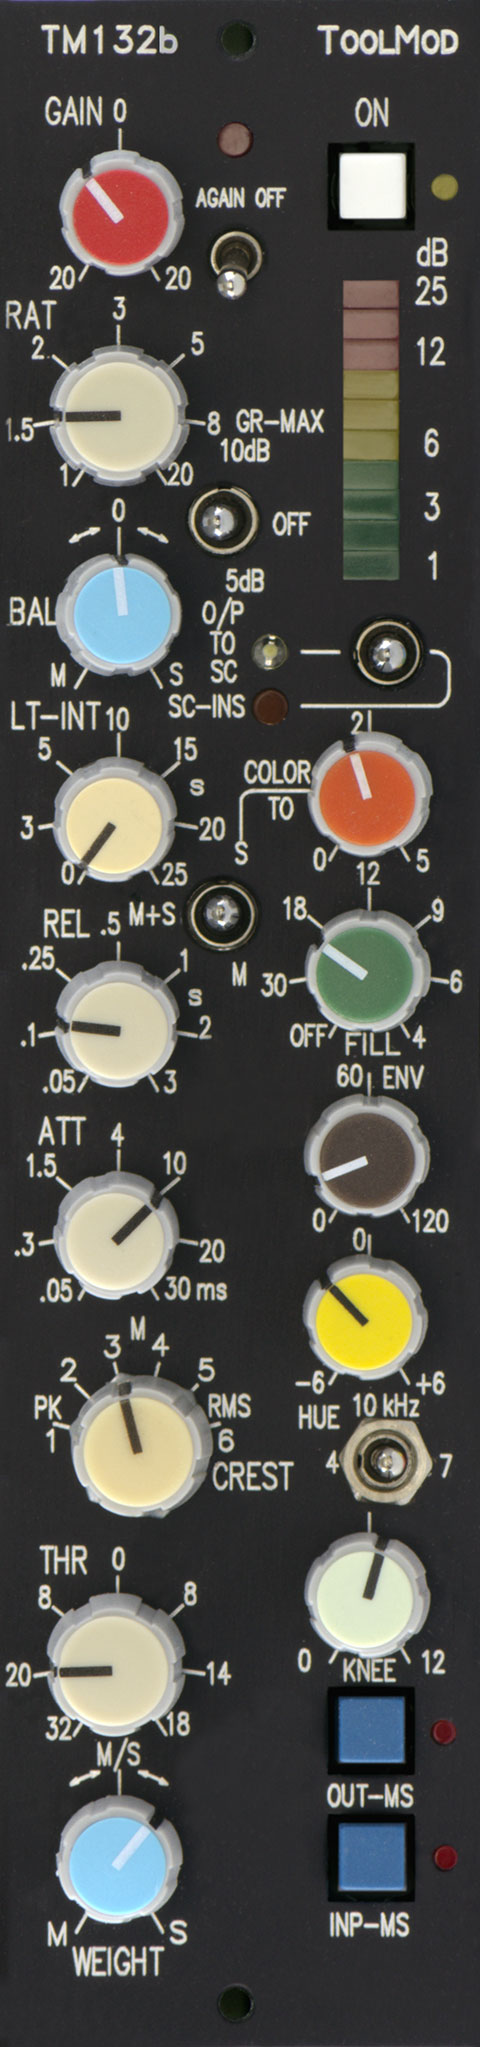 M/S Stereo Mastering Compressor TM132b without elliptic EQ and Stereo Enhancement, vertical Version